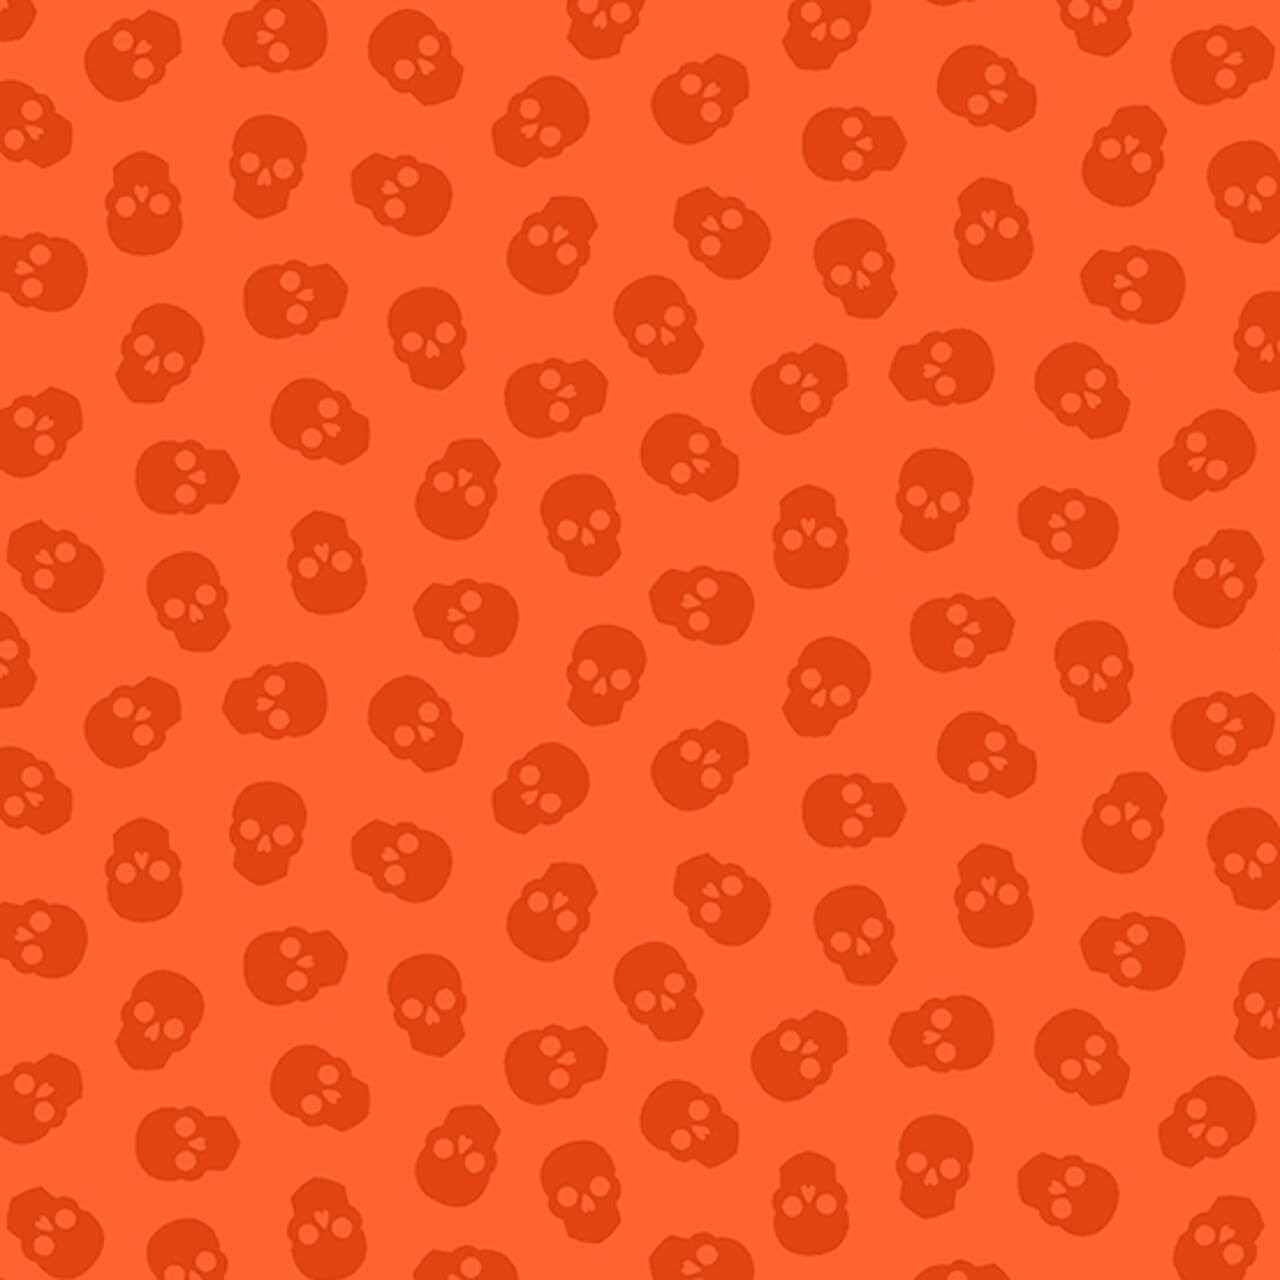 Craft with Edge: Tainted Love fabric featuring a skull motif on a red-orange background